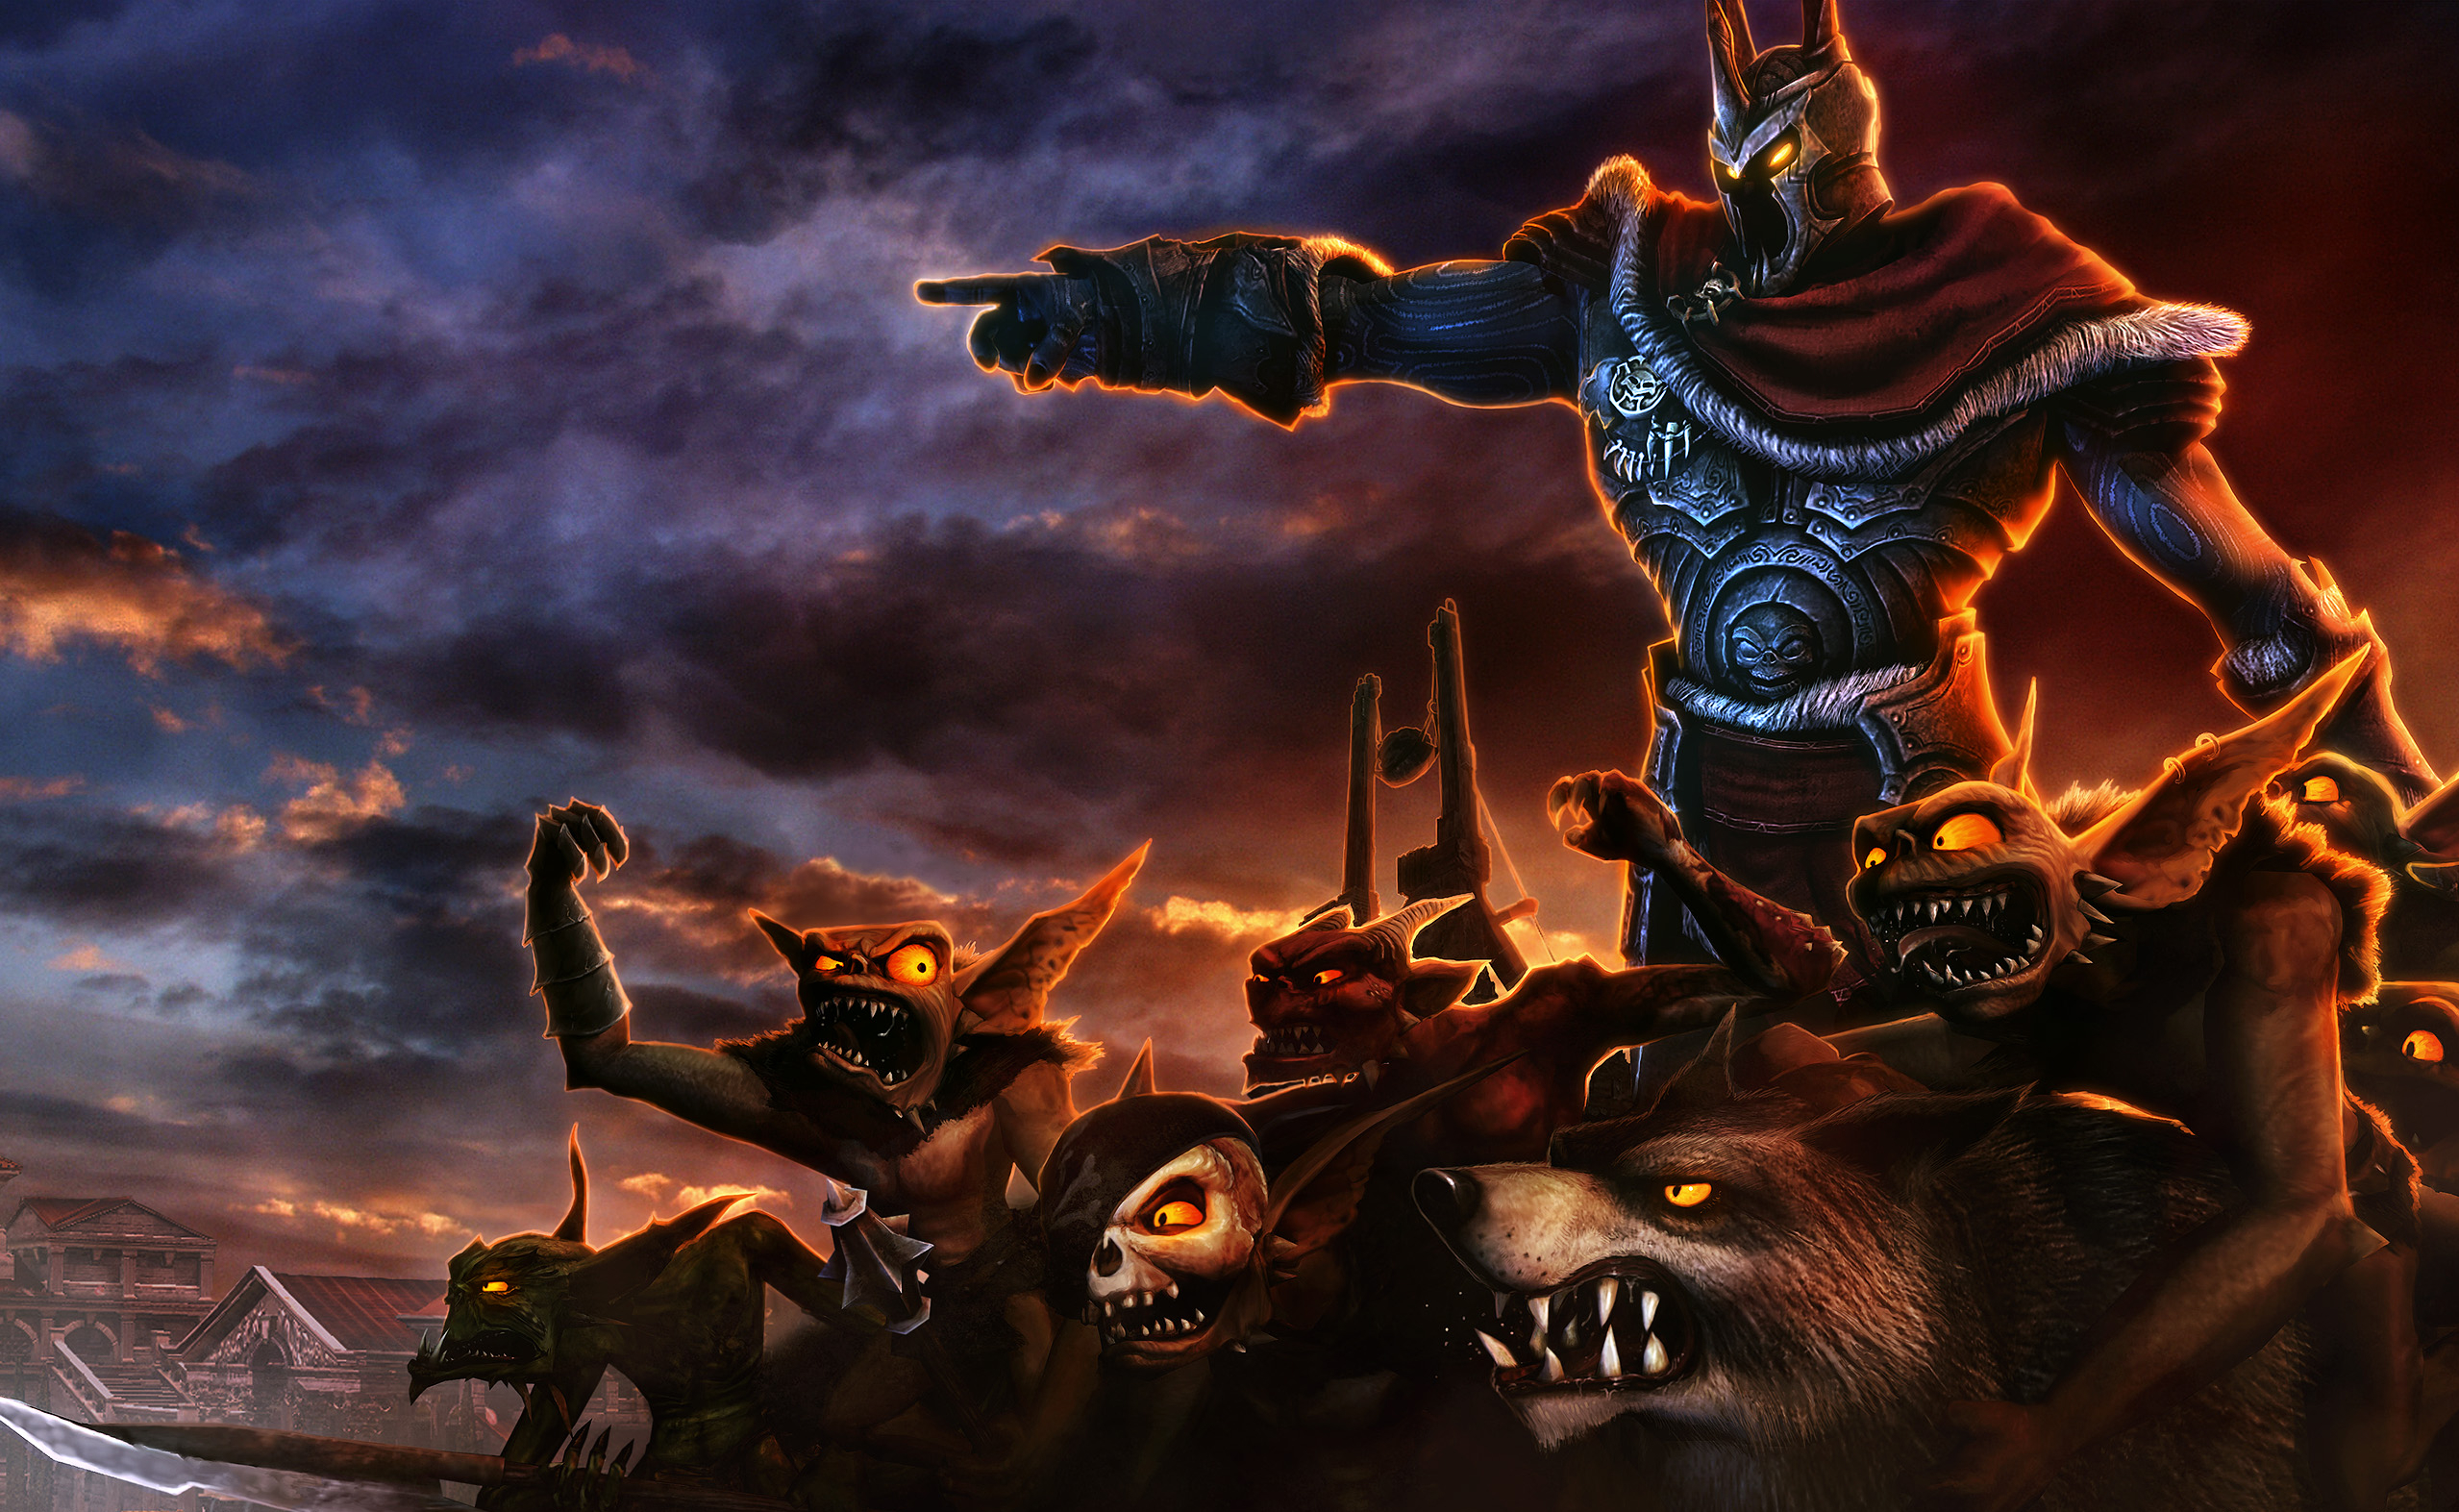 Overlord: Dark Legend Backgrounds, Compatible - PC, Mobile, Gadgets| 2558x1573 px